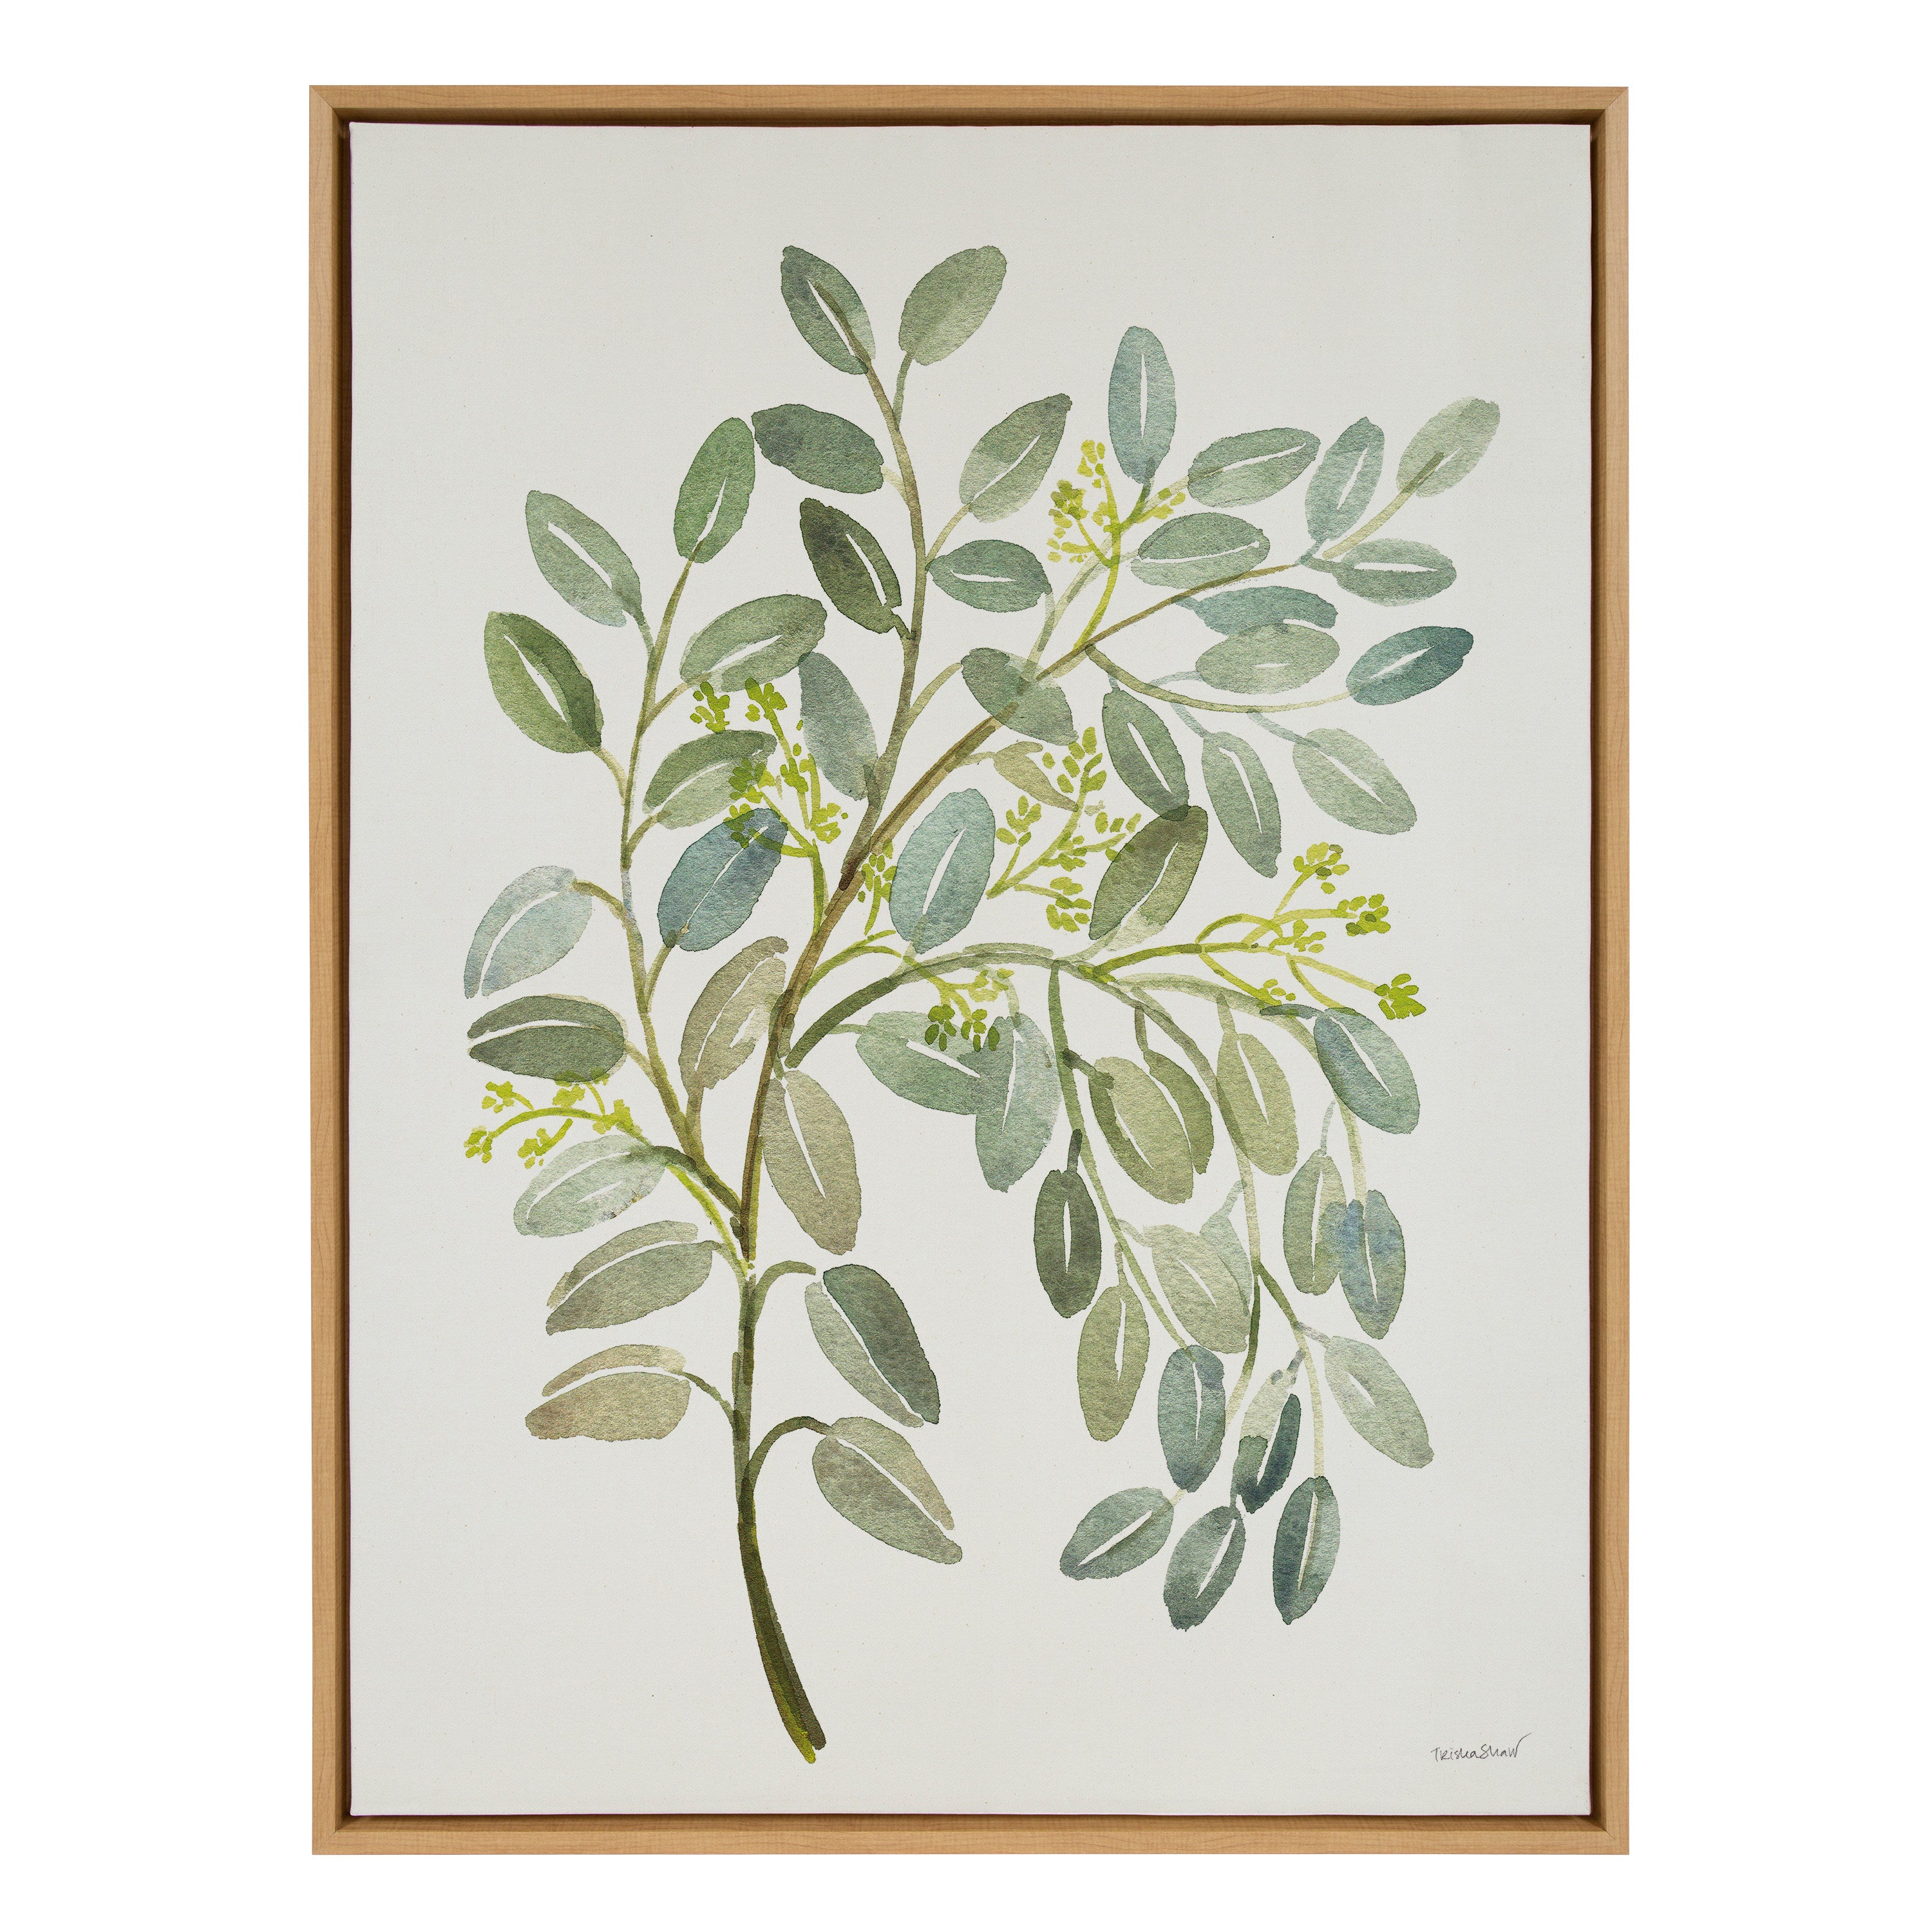 Sylvie Pale Leaves Framed Canvas by Patricia Shaw